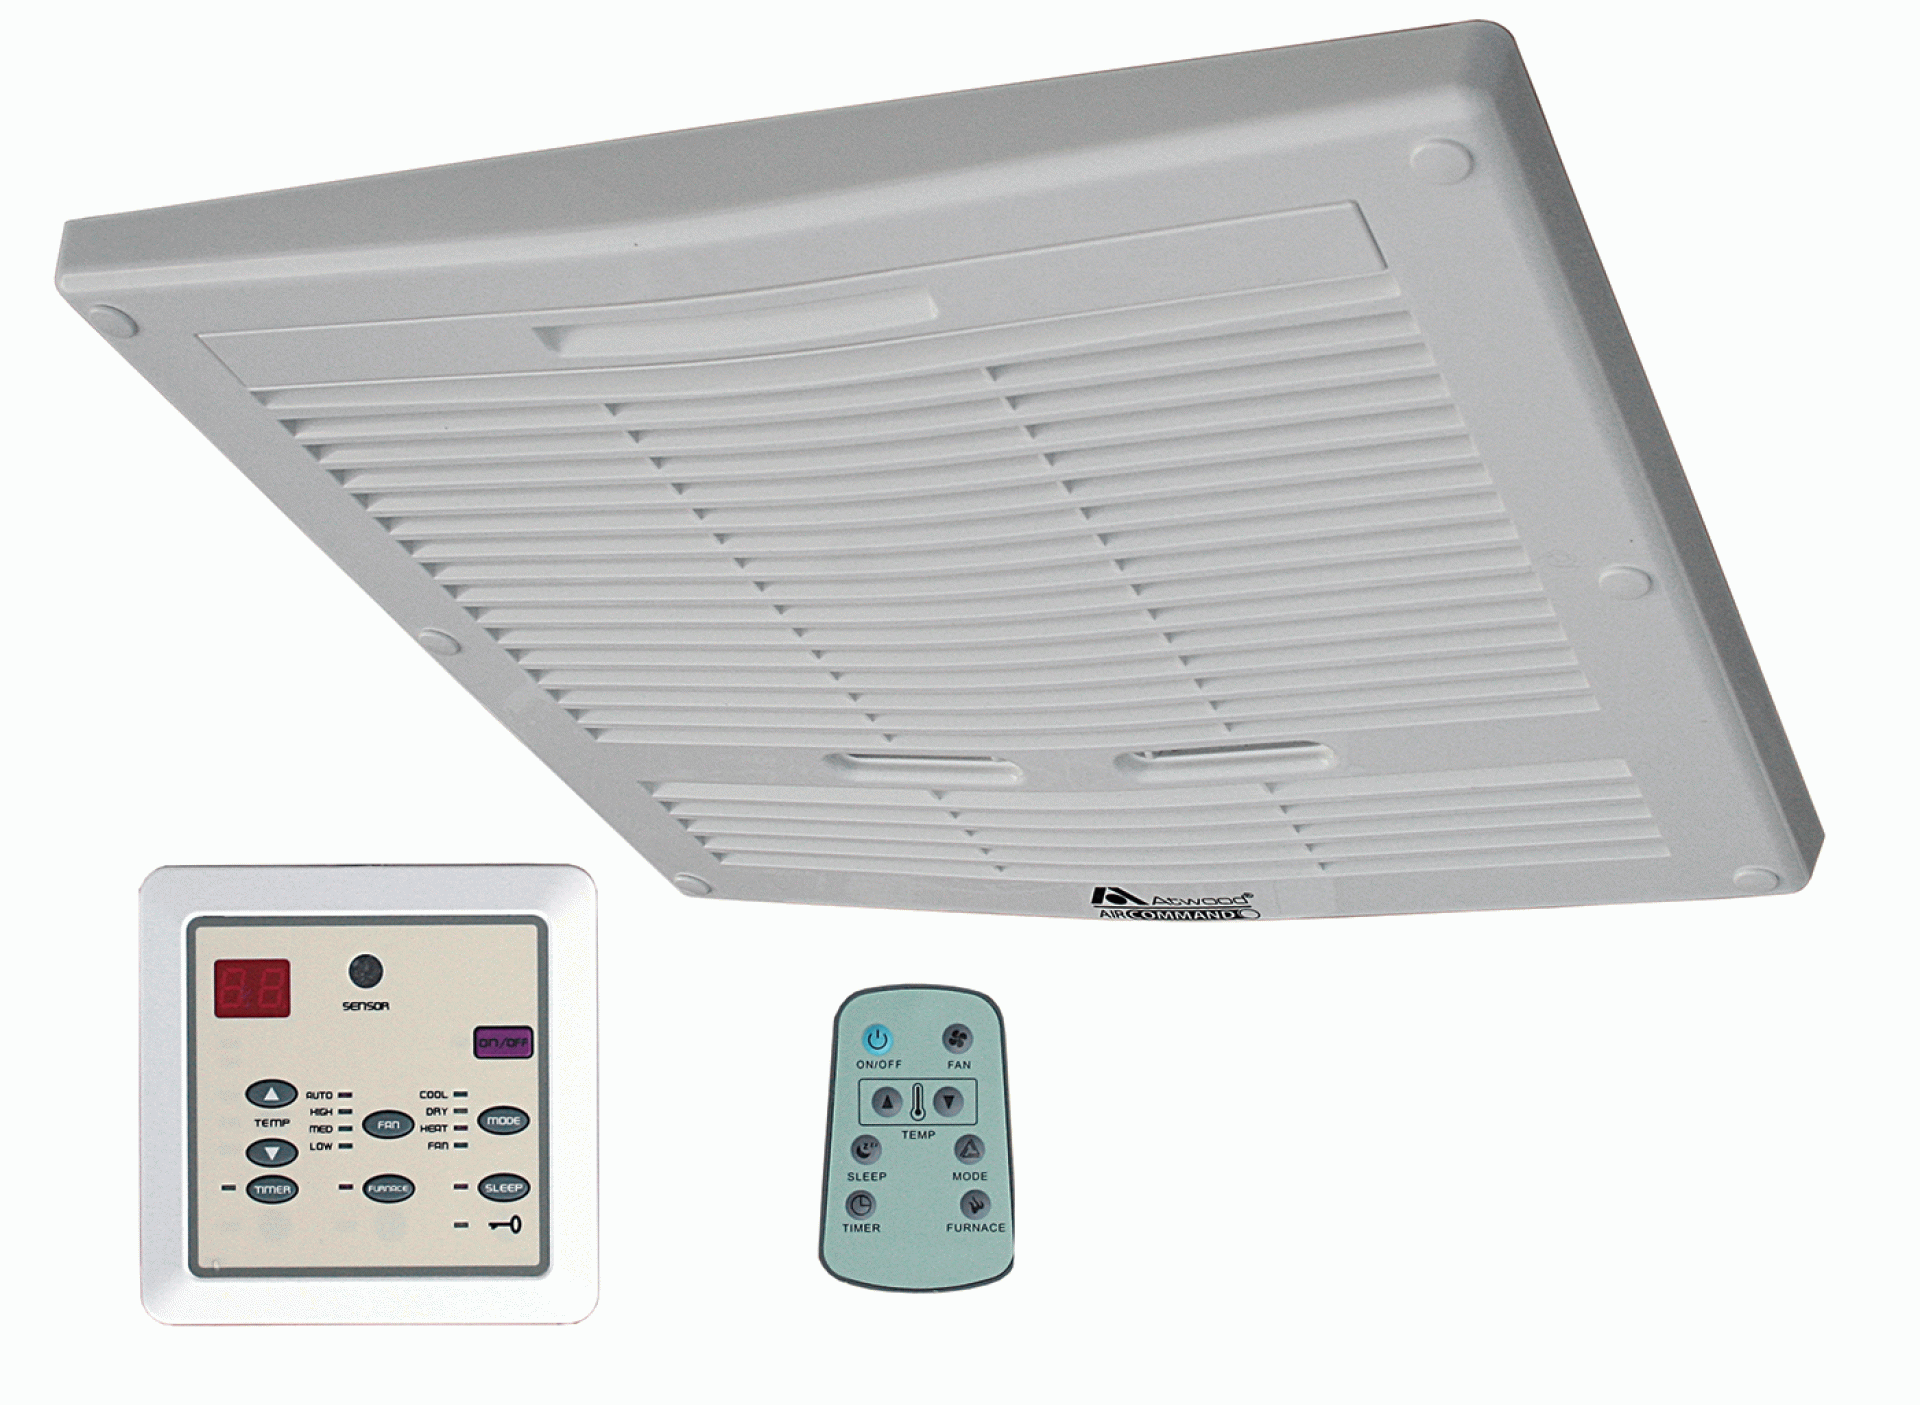 ATWOOD MOBILE PRODUCTS LLC | 15022 | A/C CEILING ASSEMBLY PLENUM DUCTED w/ REMOTE AND DIGITAL THERMOSTAT - WHITE